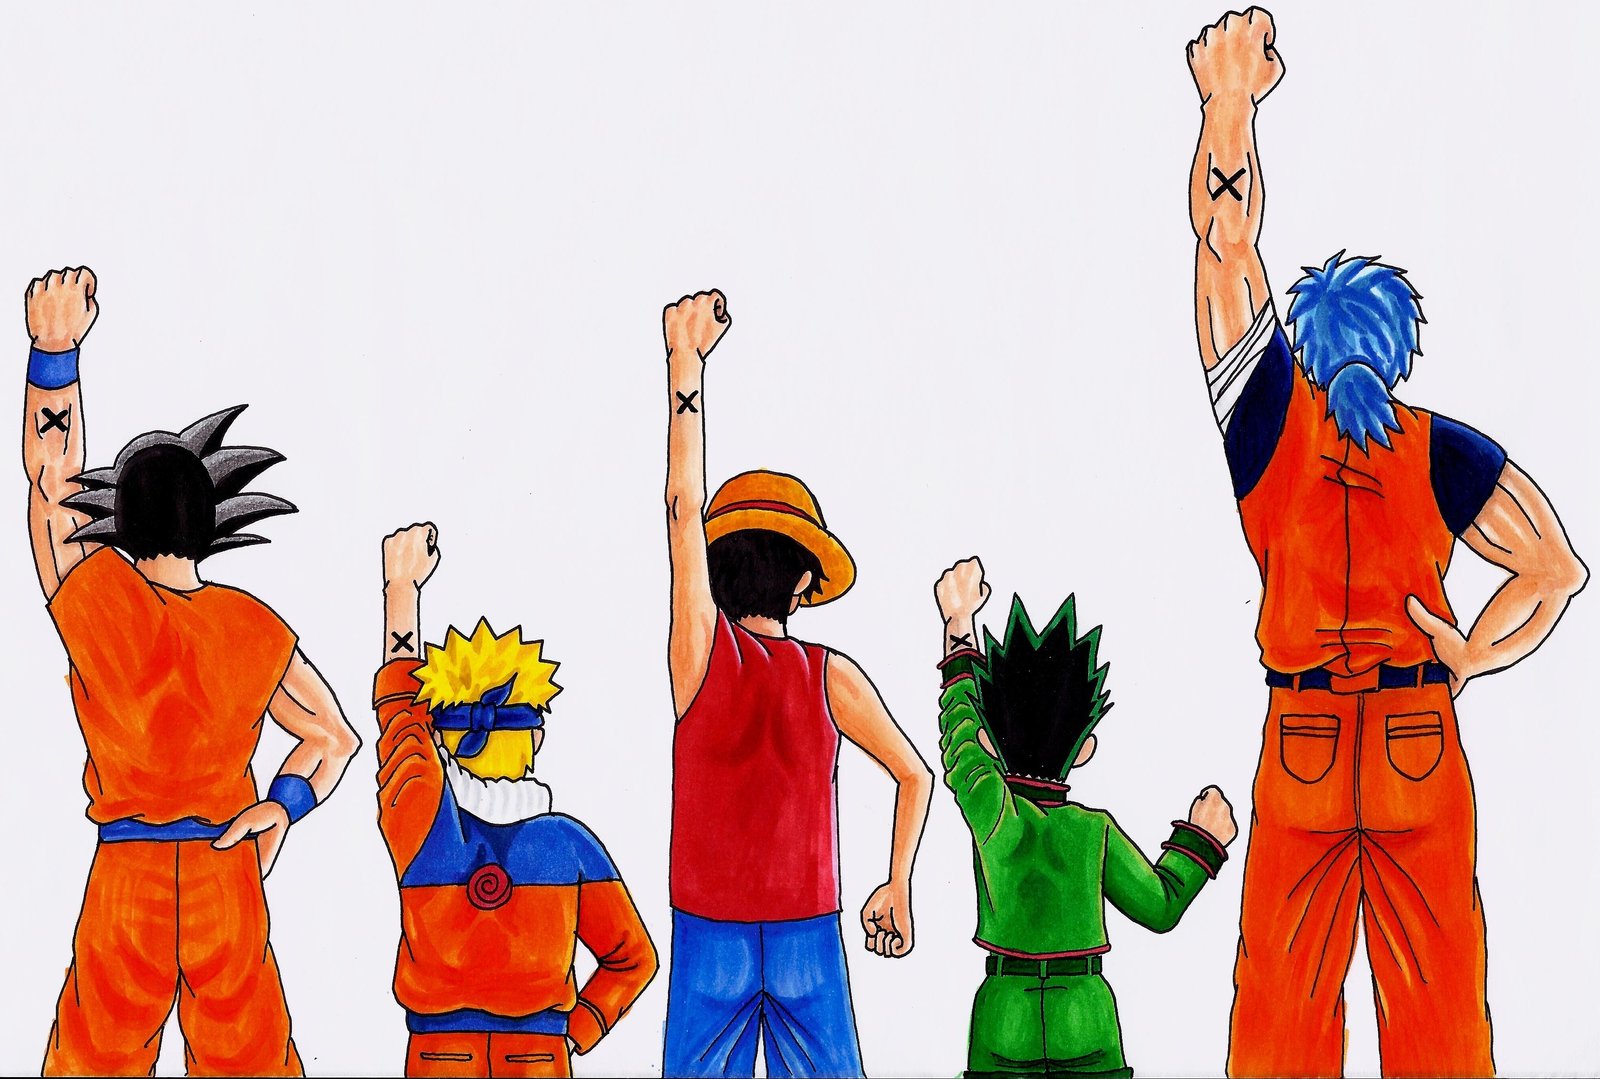 Hands Up!! by TolkienOP on DeviantArt